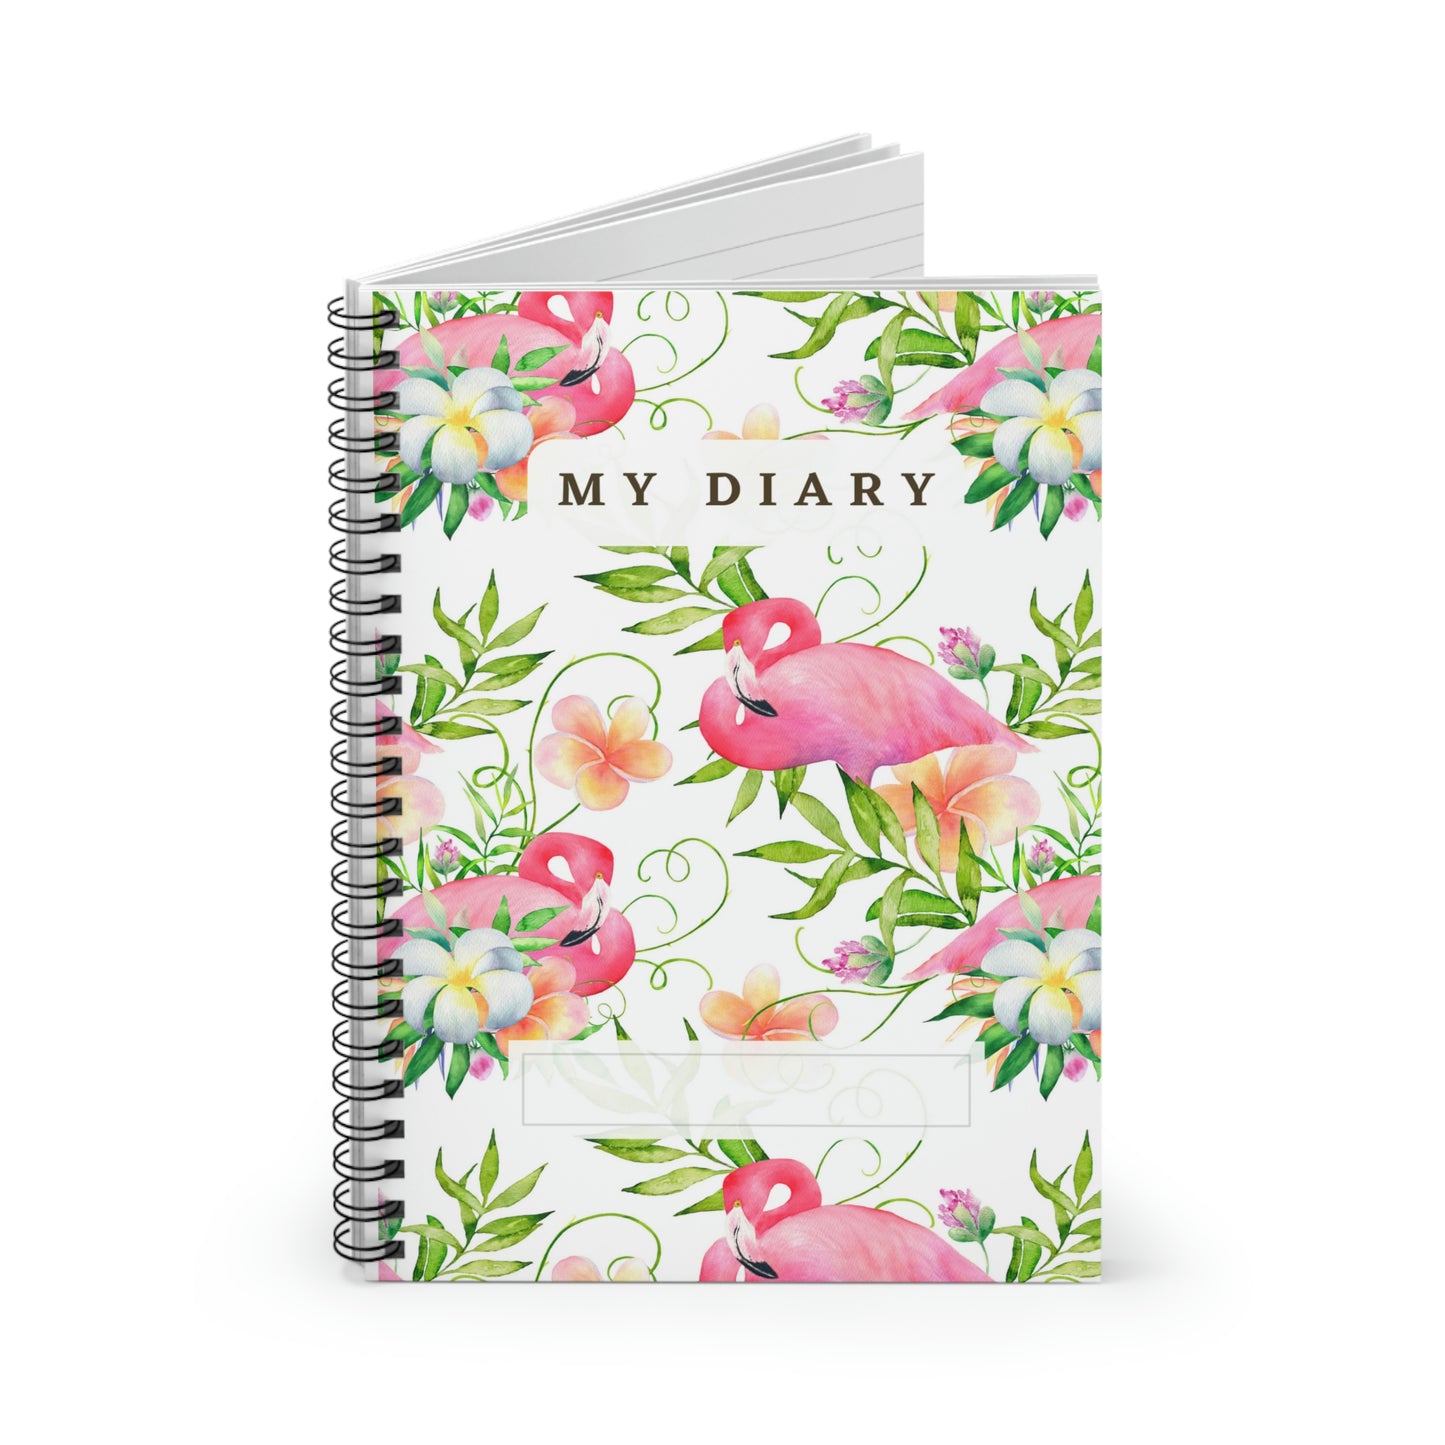 Framingo with flowers design "My Diary" Spiral Notebook - Ruled Line 118 pages